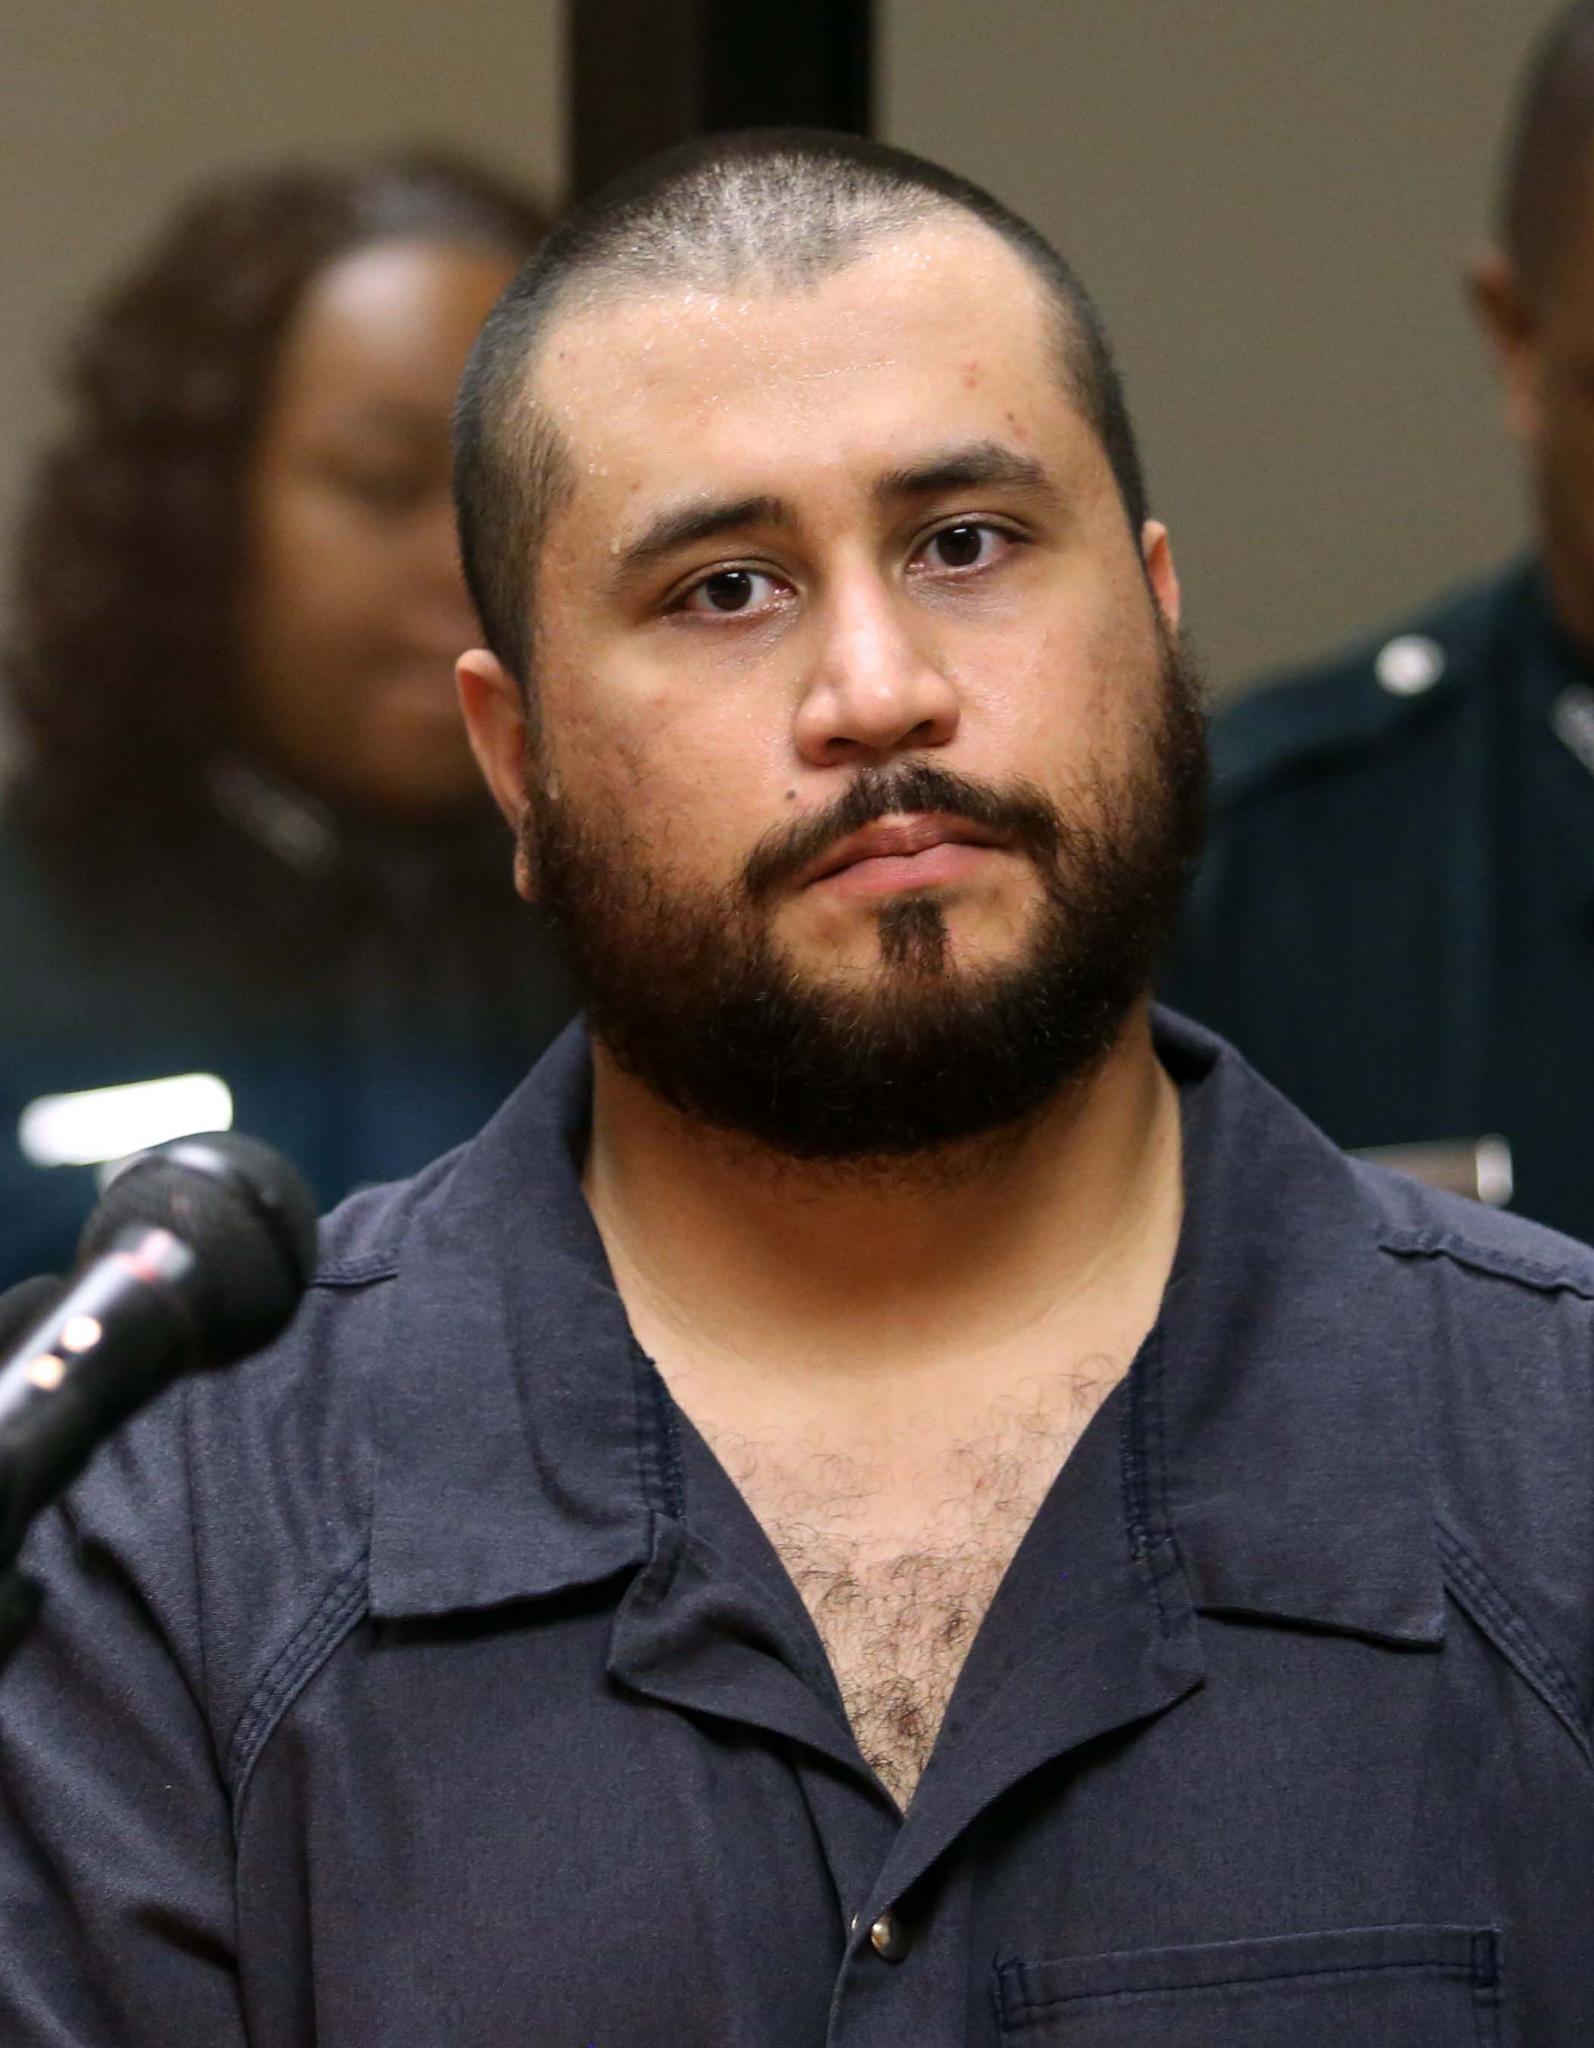 George Zimmerman is Auctioning Off The Gun He Used to Take Trayvon Martin's Life
